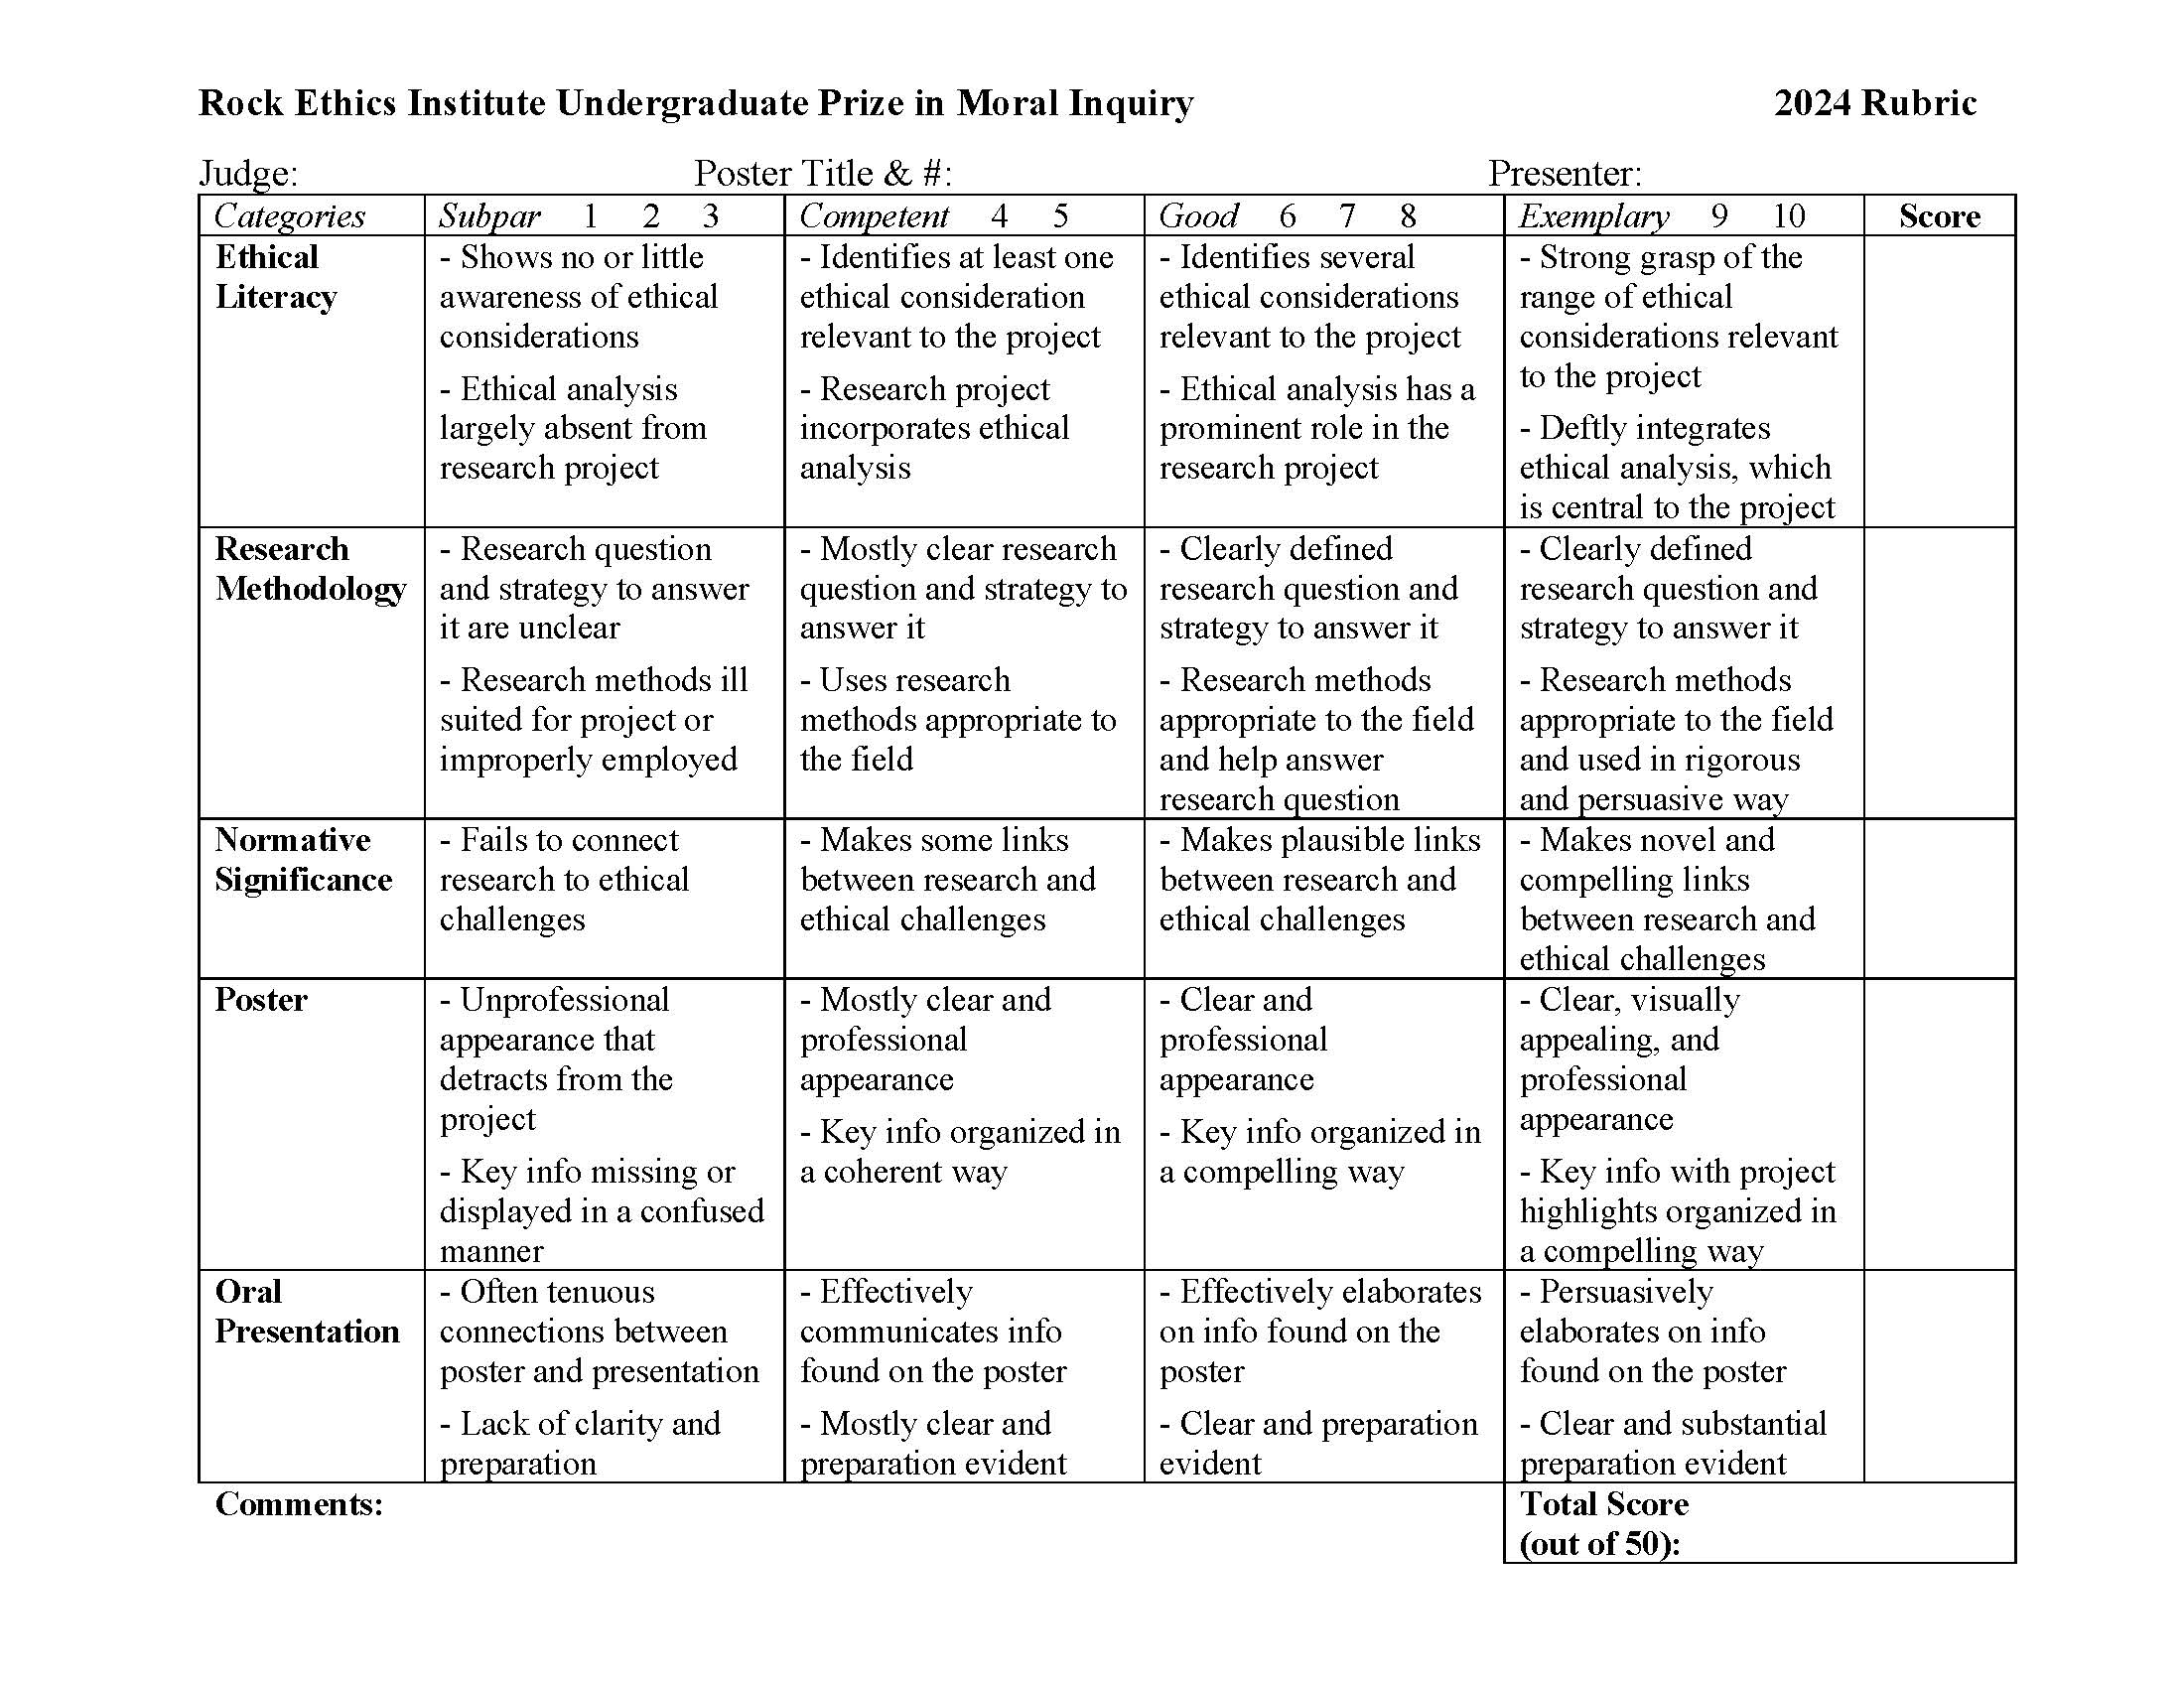 This judging rubric is available in alternate media upon request to dap101@psu.edu